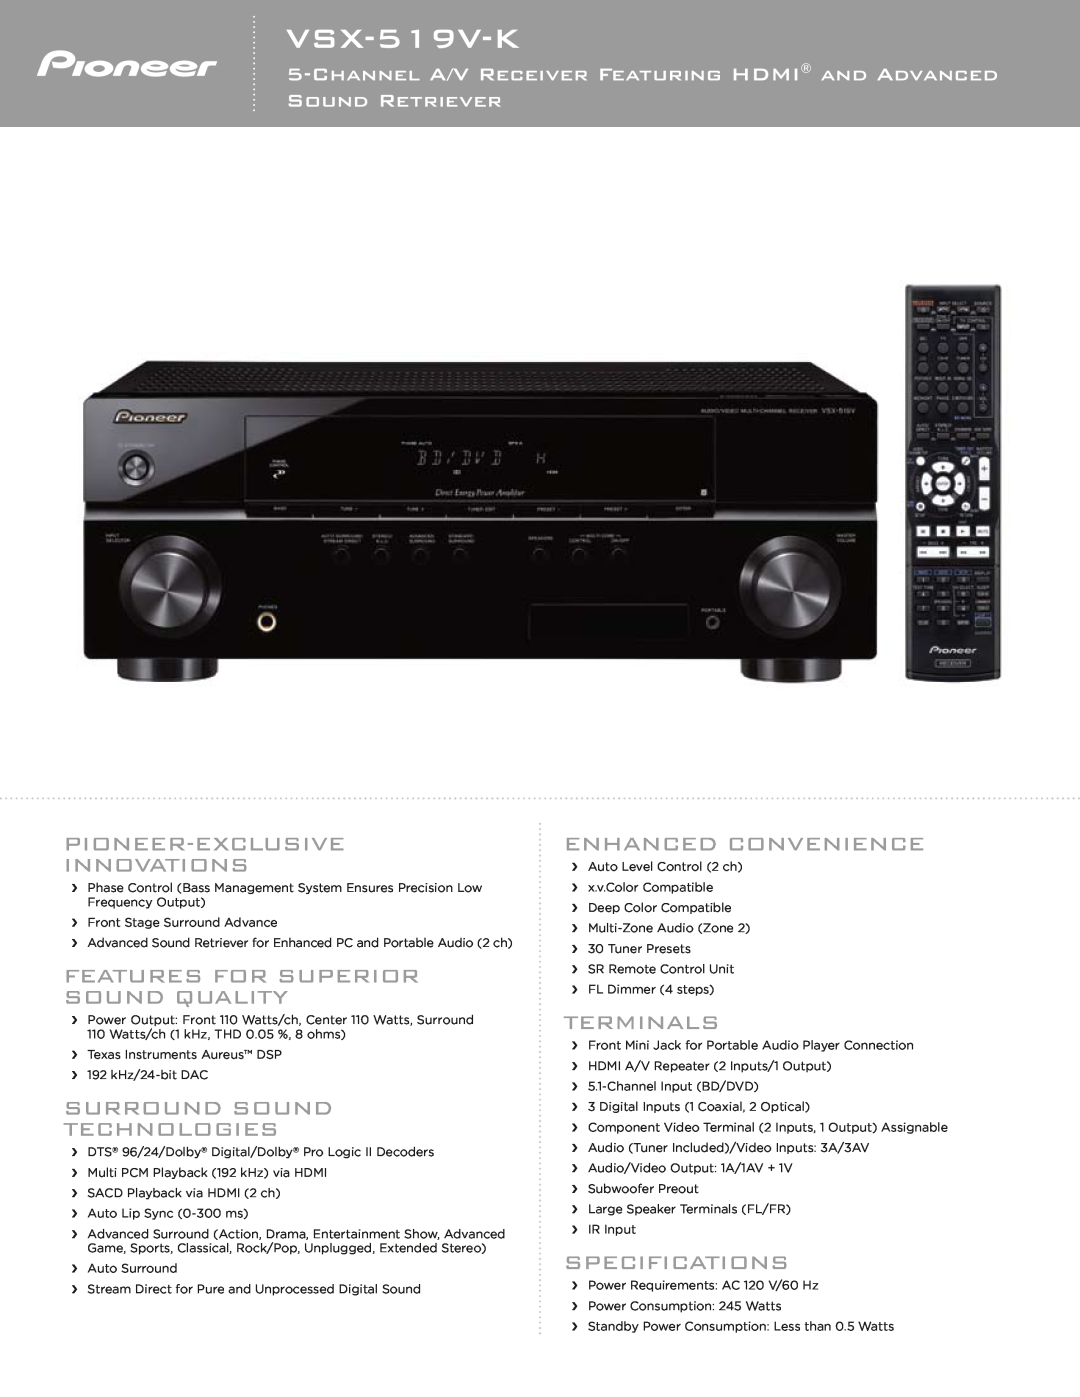 Pioneer VSX-519V-K specifications Pioneer-Exclusive Innovations, Features For Superior Sound Quality, Enhanced Convenience 